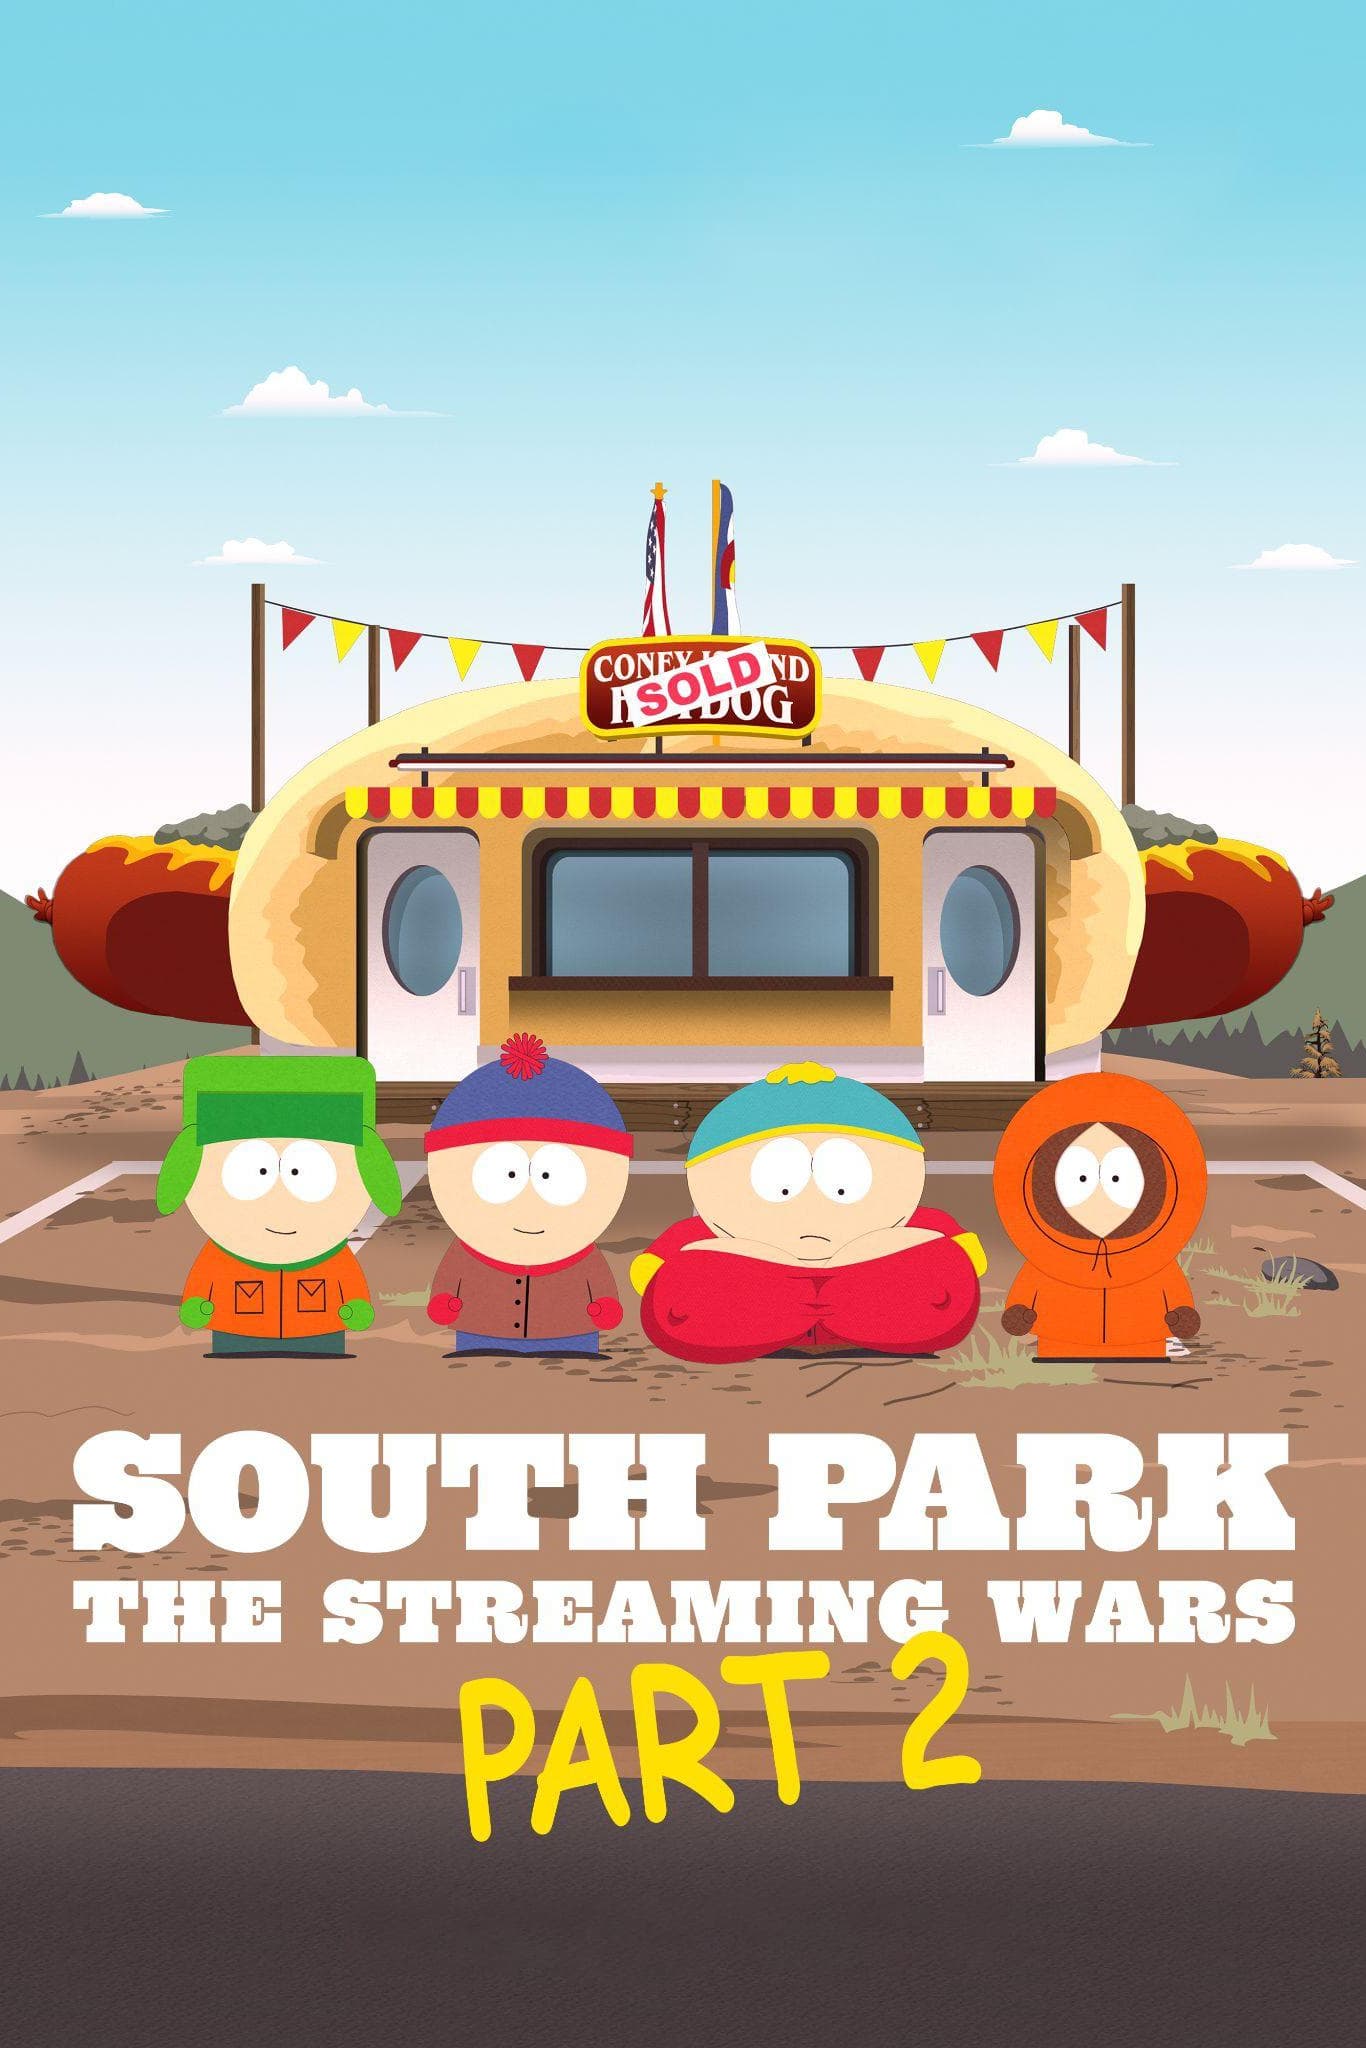 South Park the Streaming Wars (Part 2) 2022